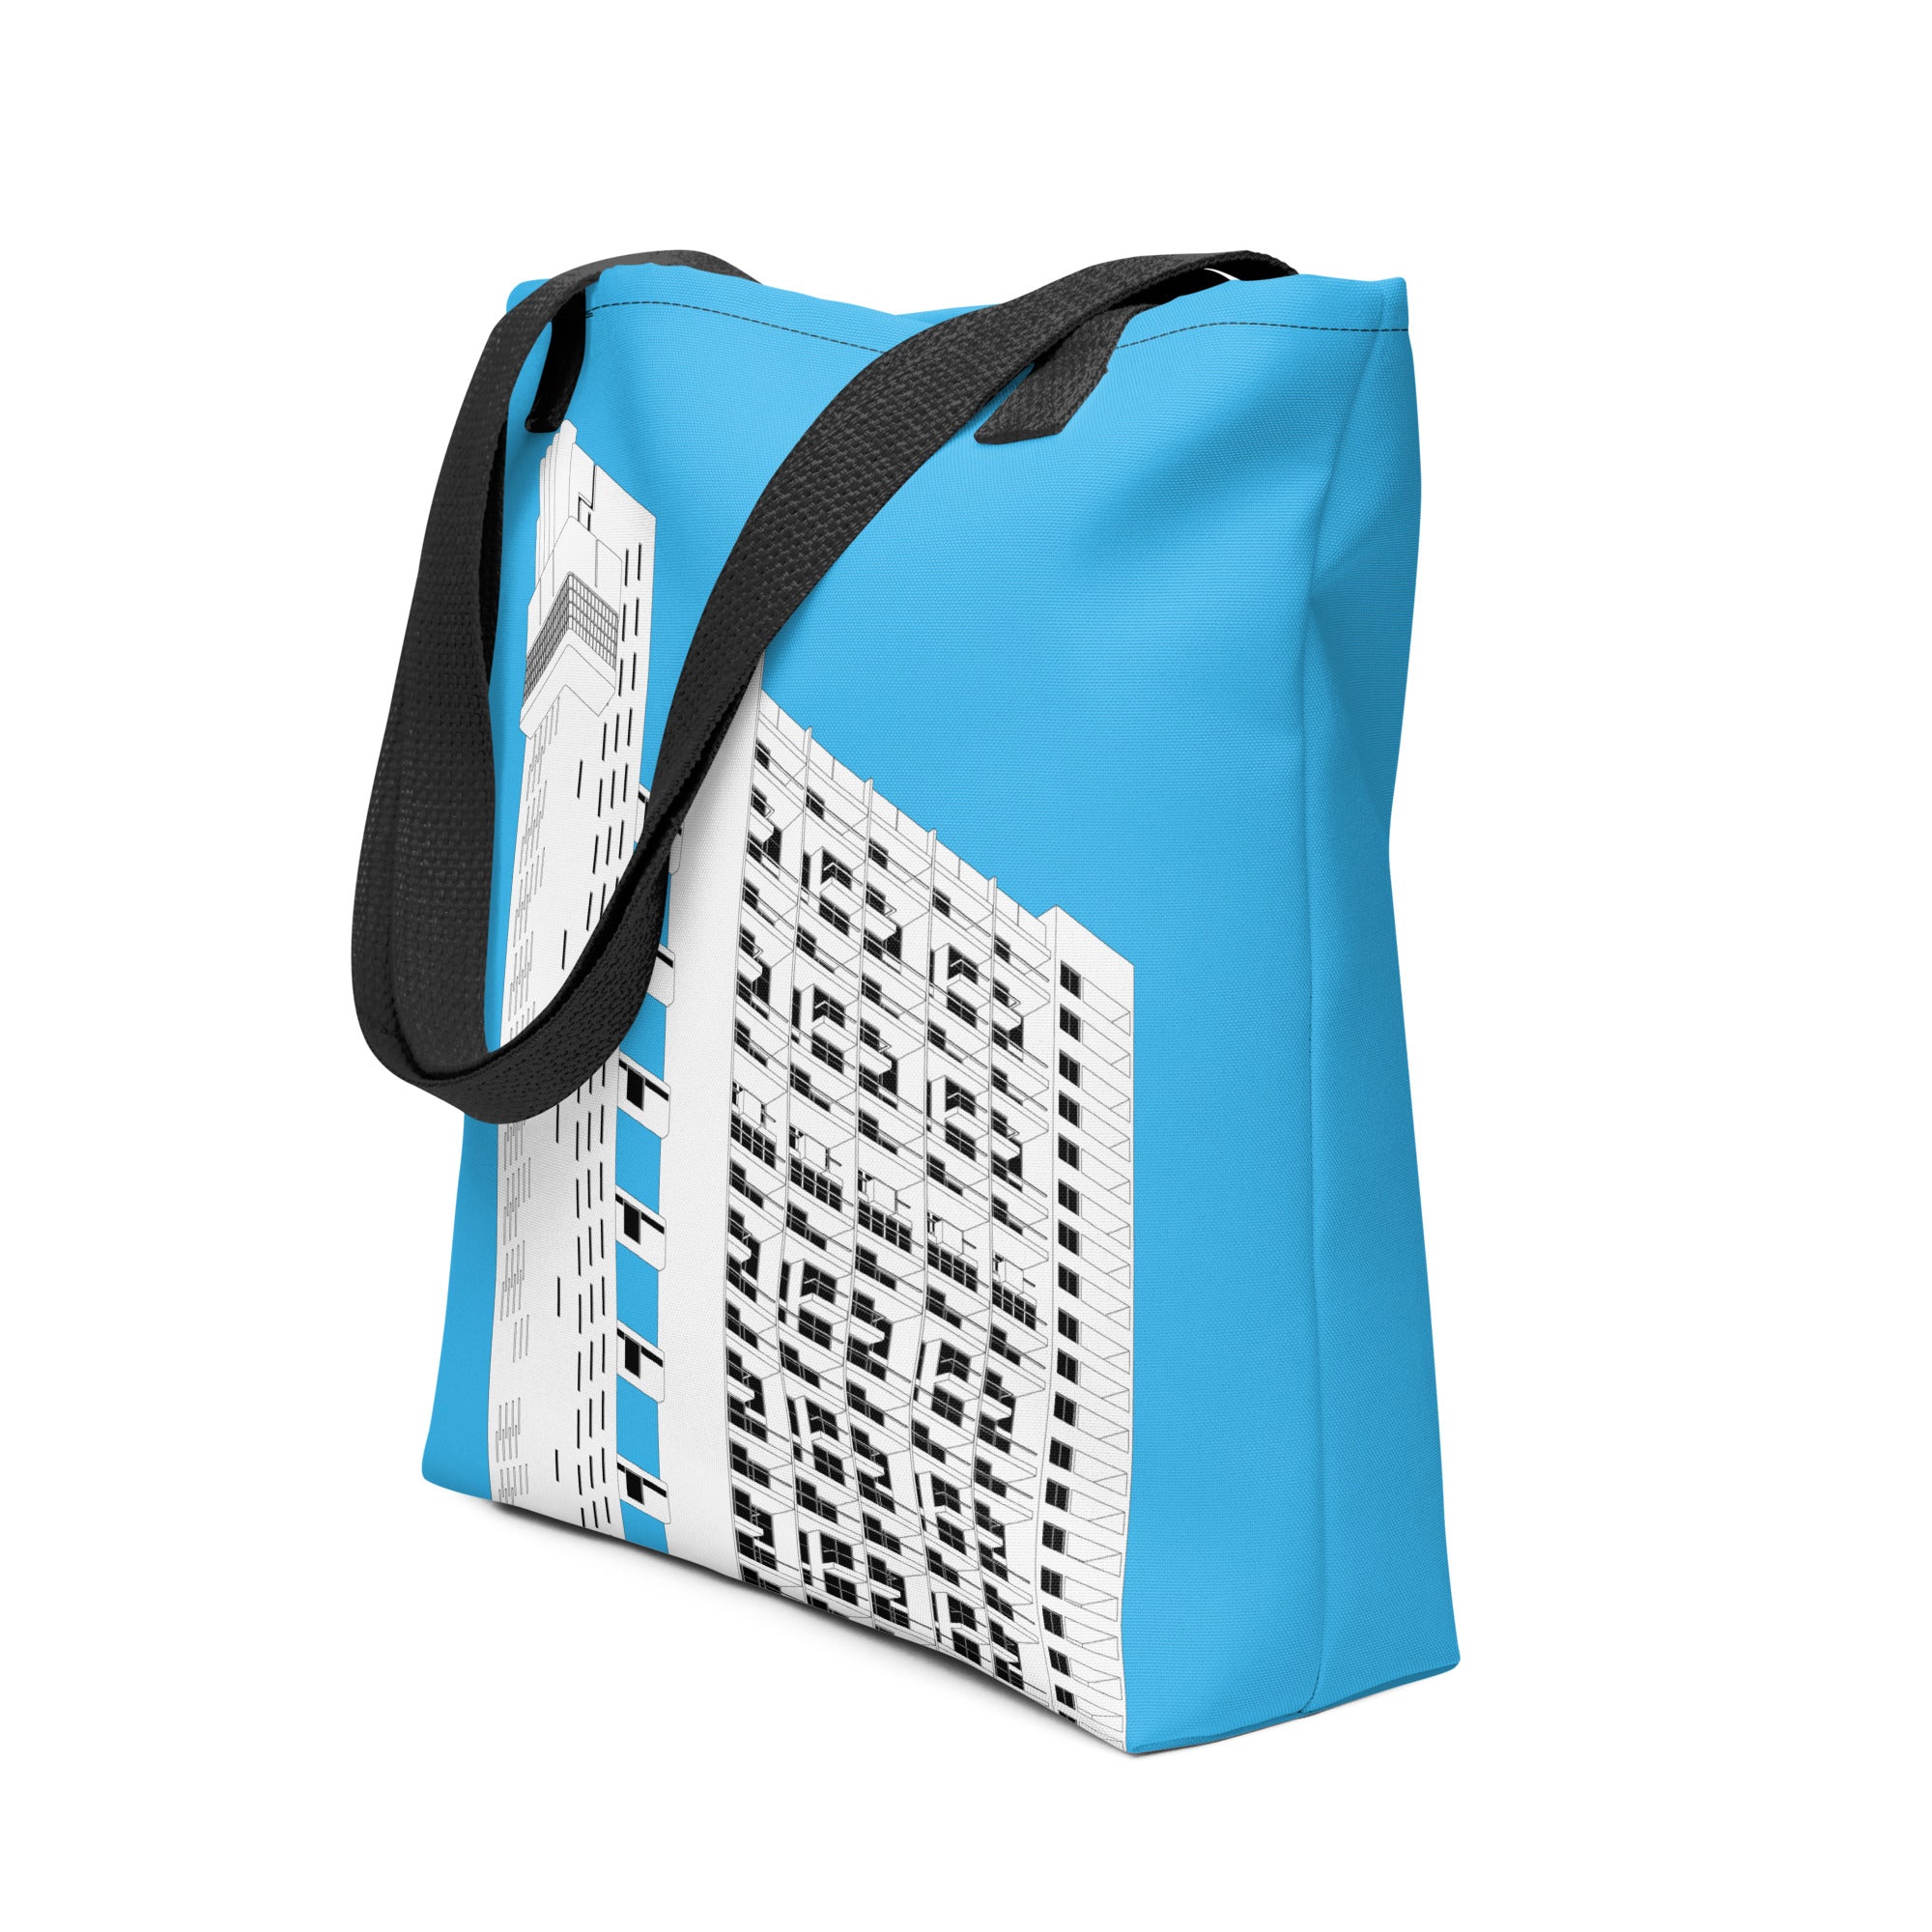 Trellick Tower Blue Tote Bags